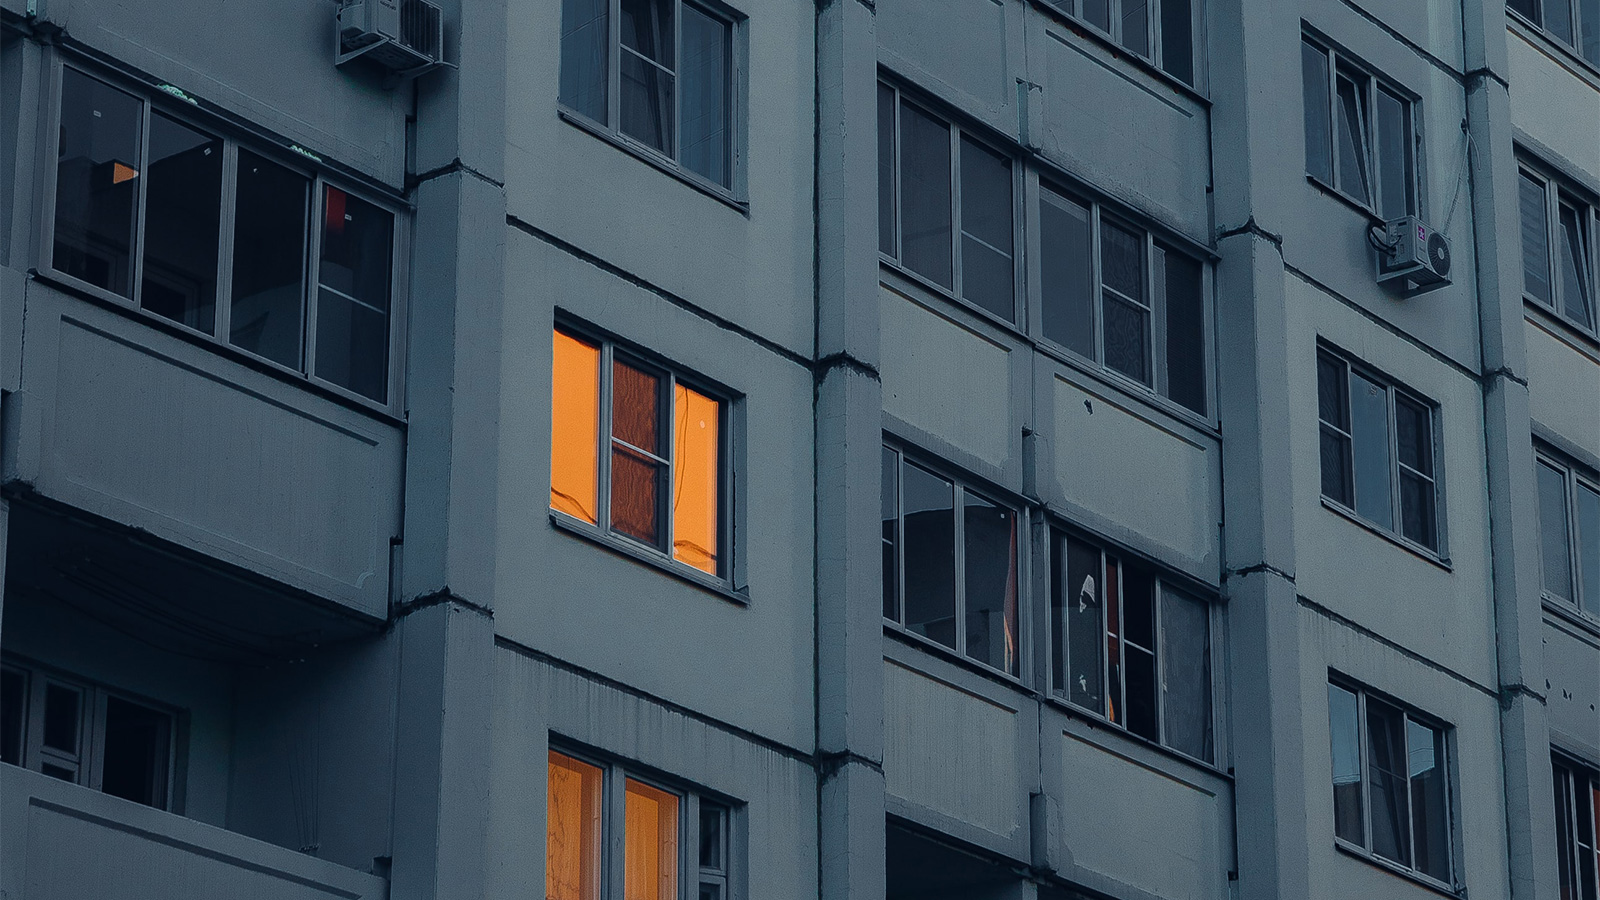 A window lit up in an apartment building at dusk.